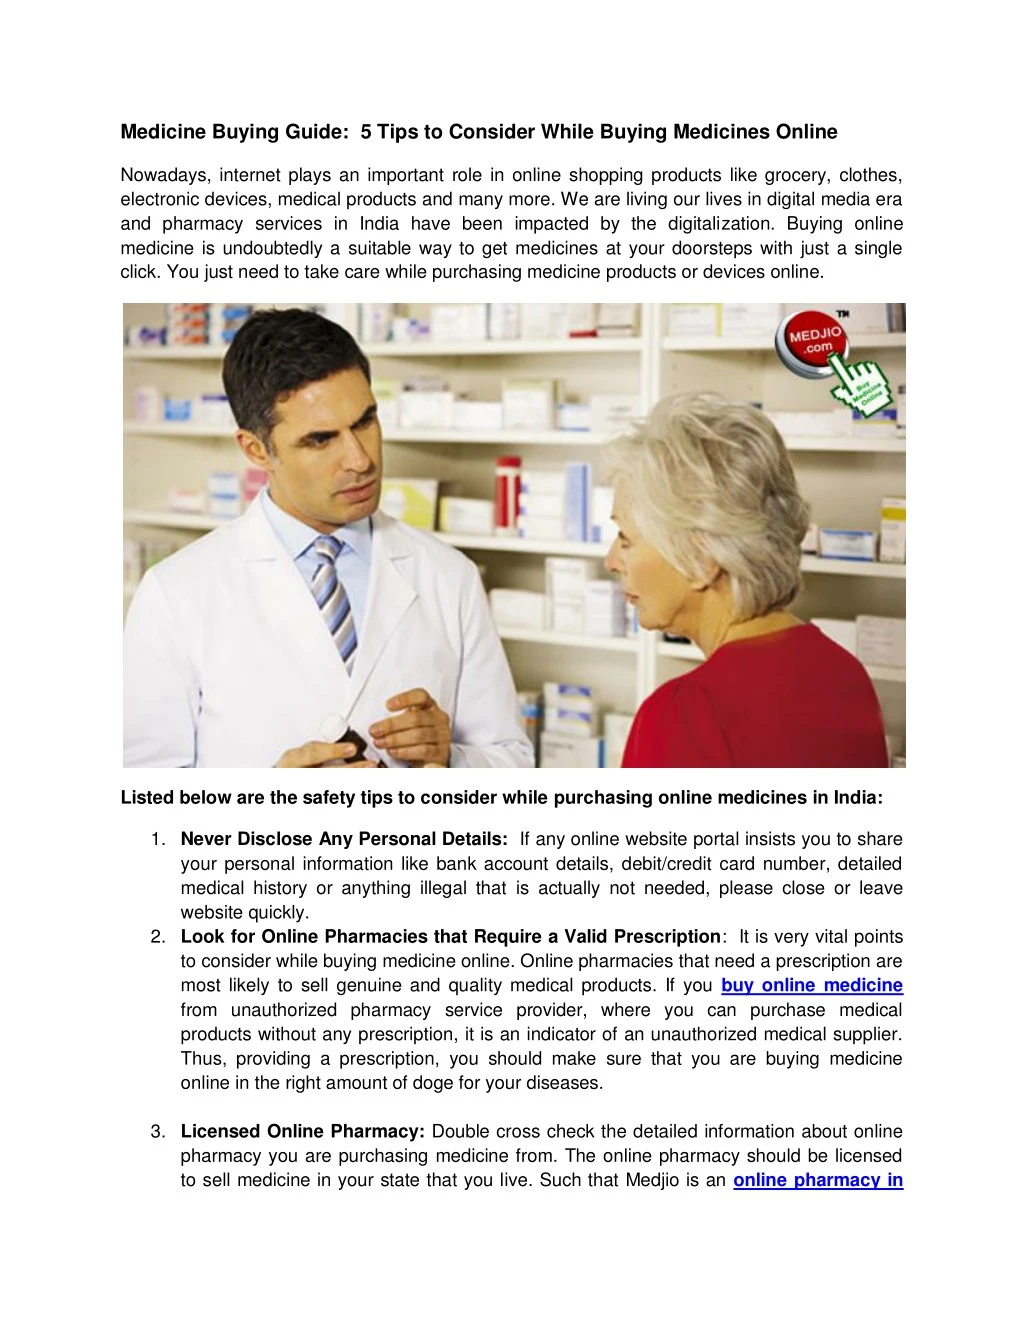 PPT - Medicine Buying Guide: 5 Tips to Consider While Buying Medicines ...